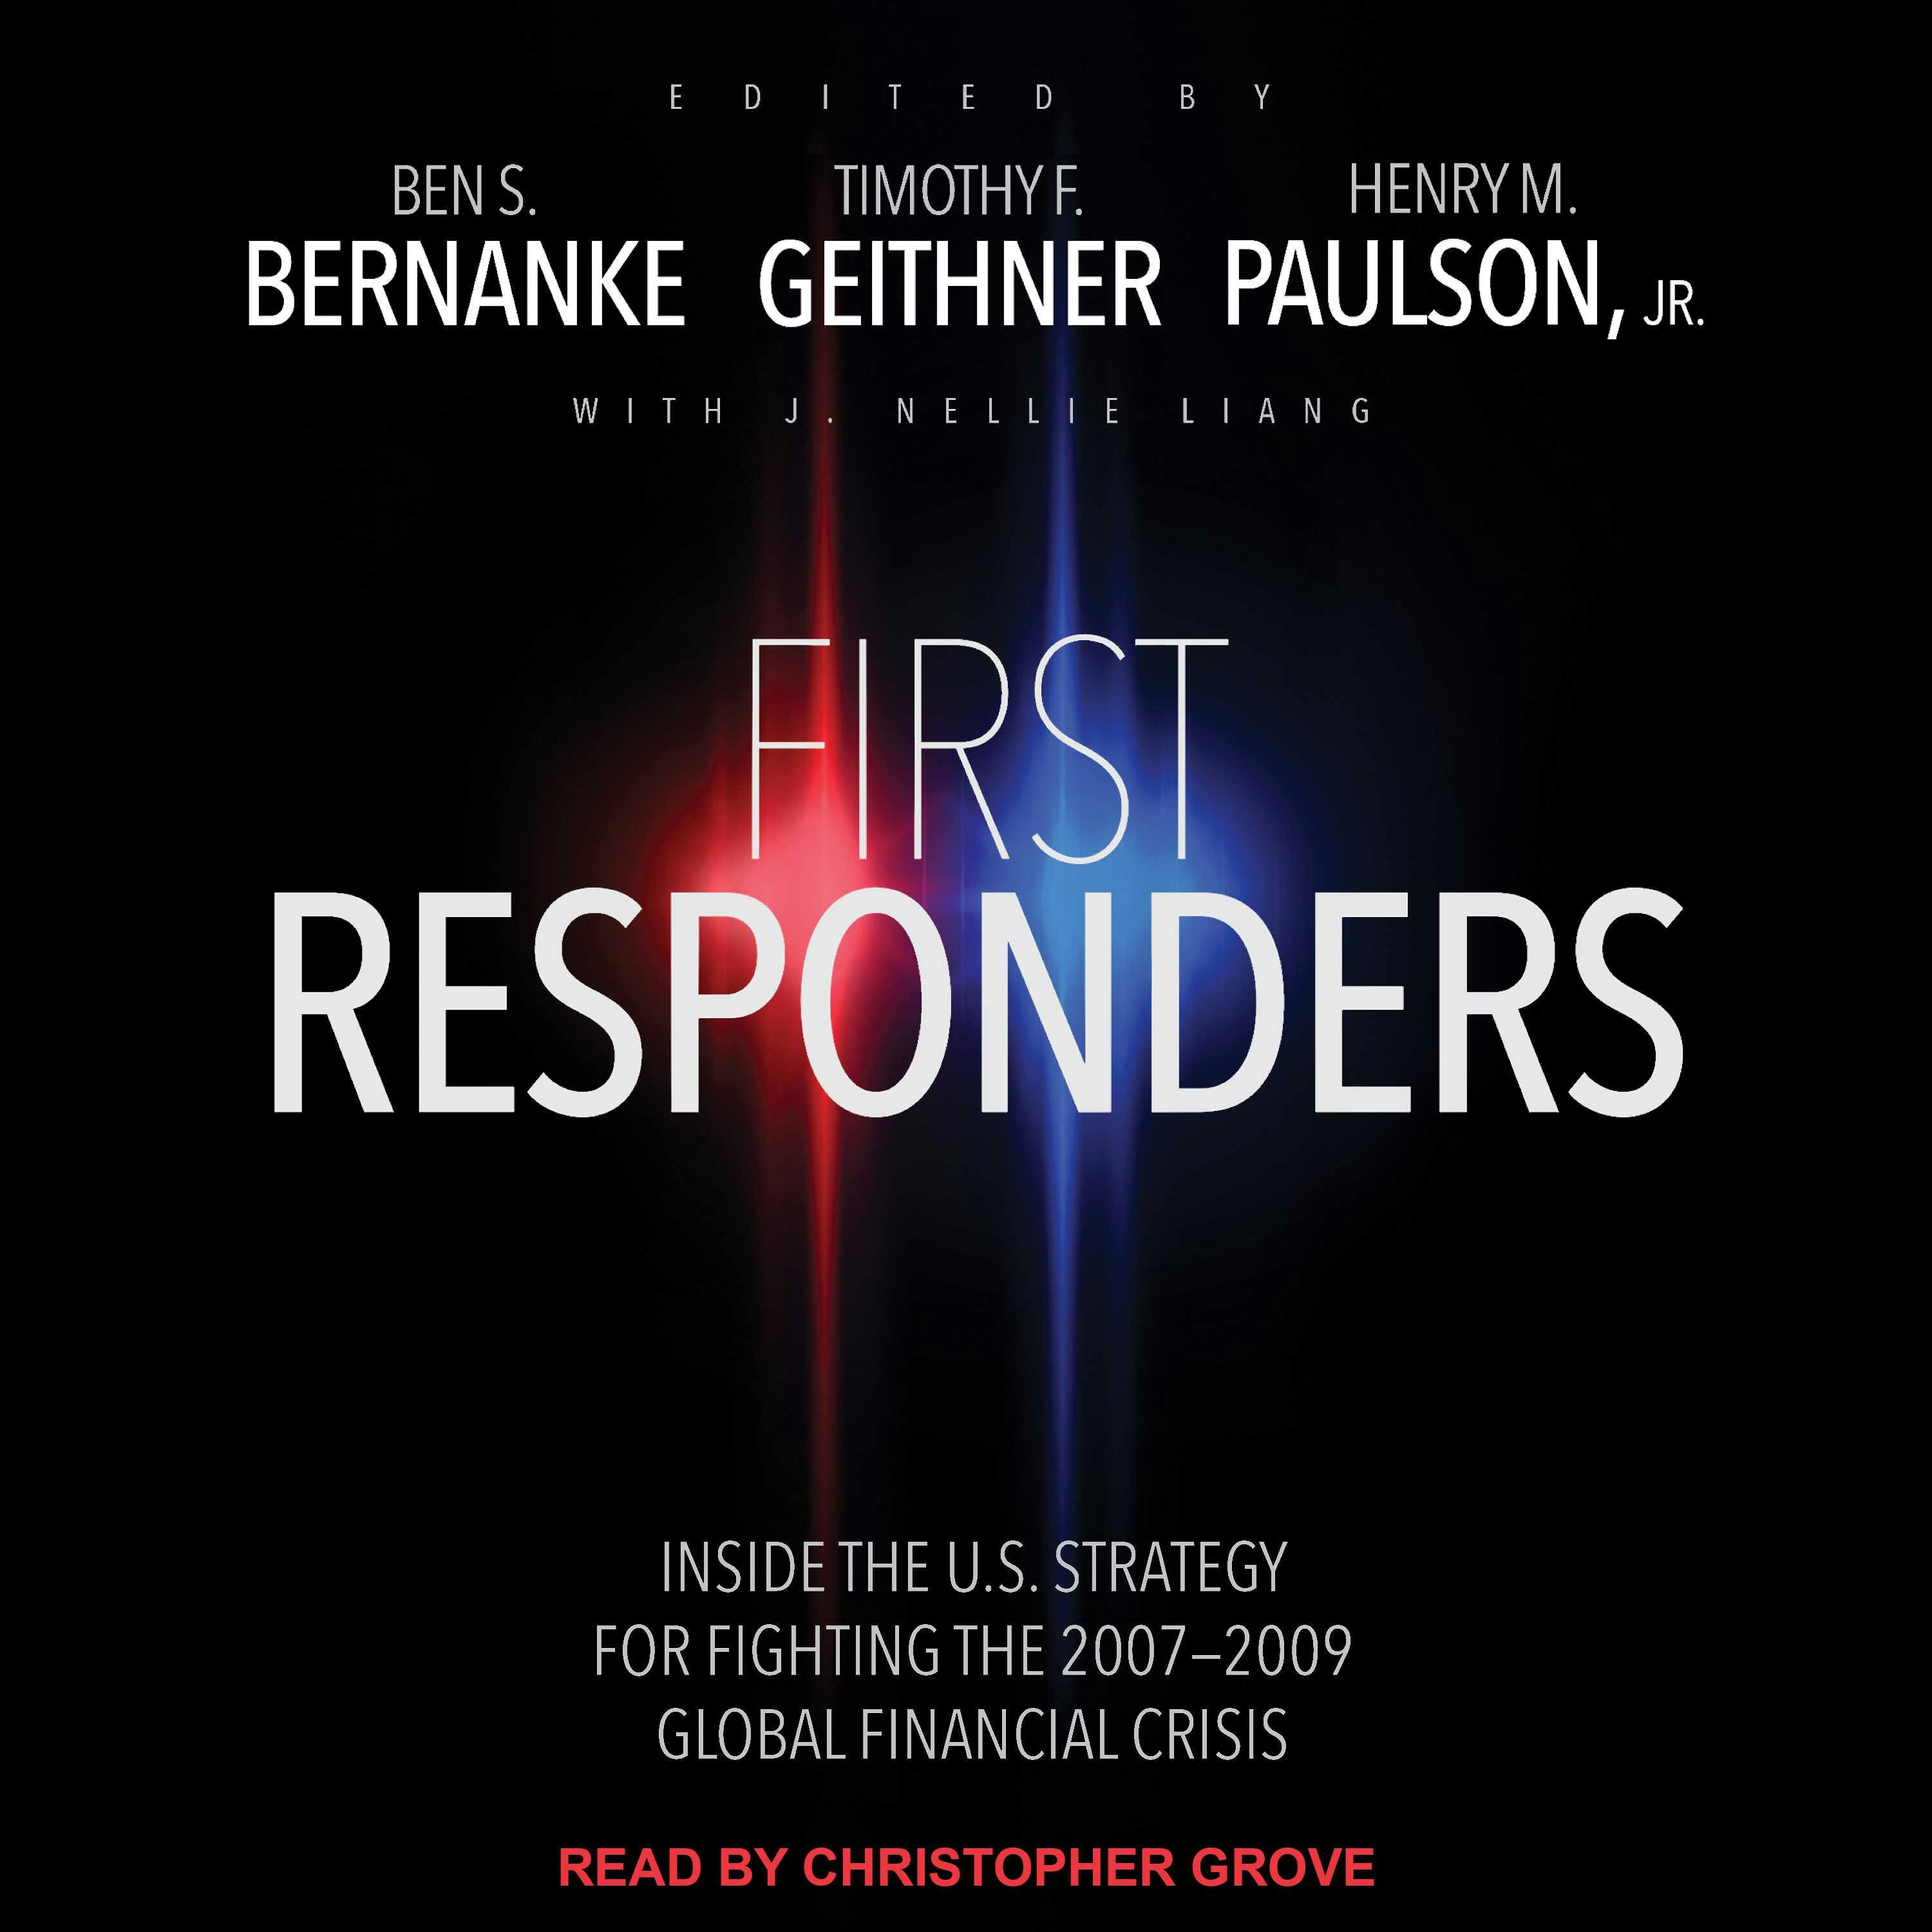 First Responders: Inside the U.S. Strategy for Fighting the 2007-2009 Global Financial Crisis - J. Nellie Liang, Ben S. Bernanke, Timothy F. Geithner, Henry M. Paulson, Jr.